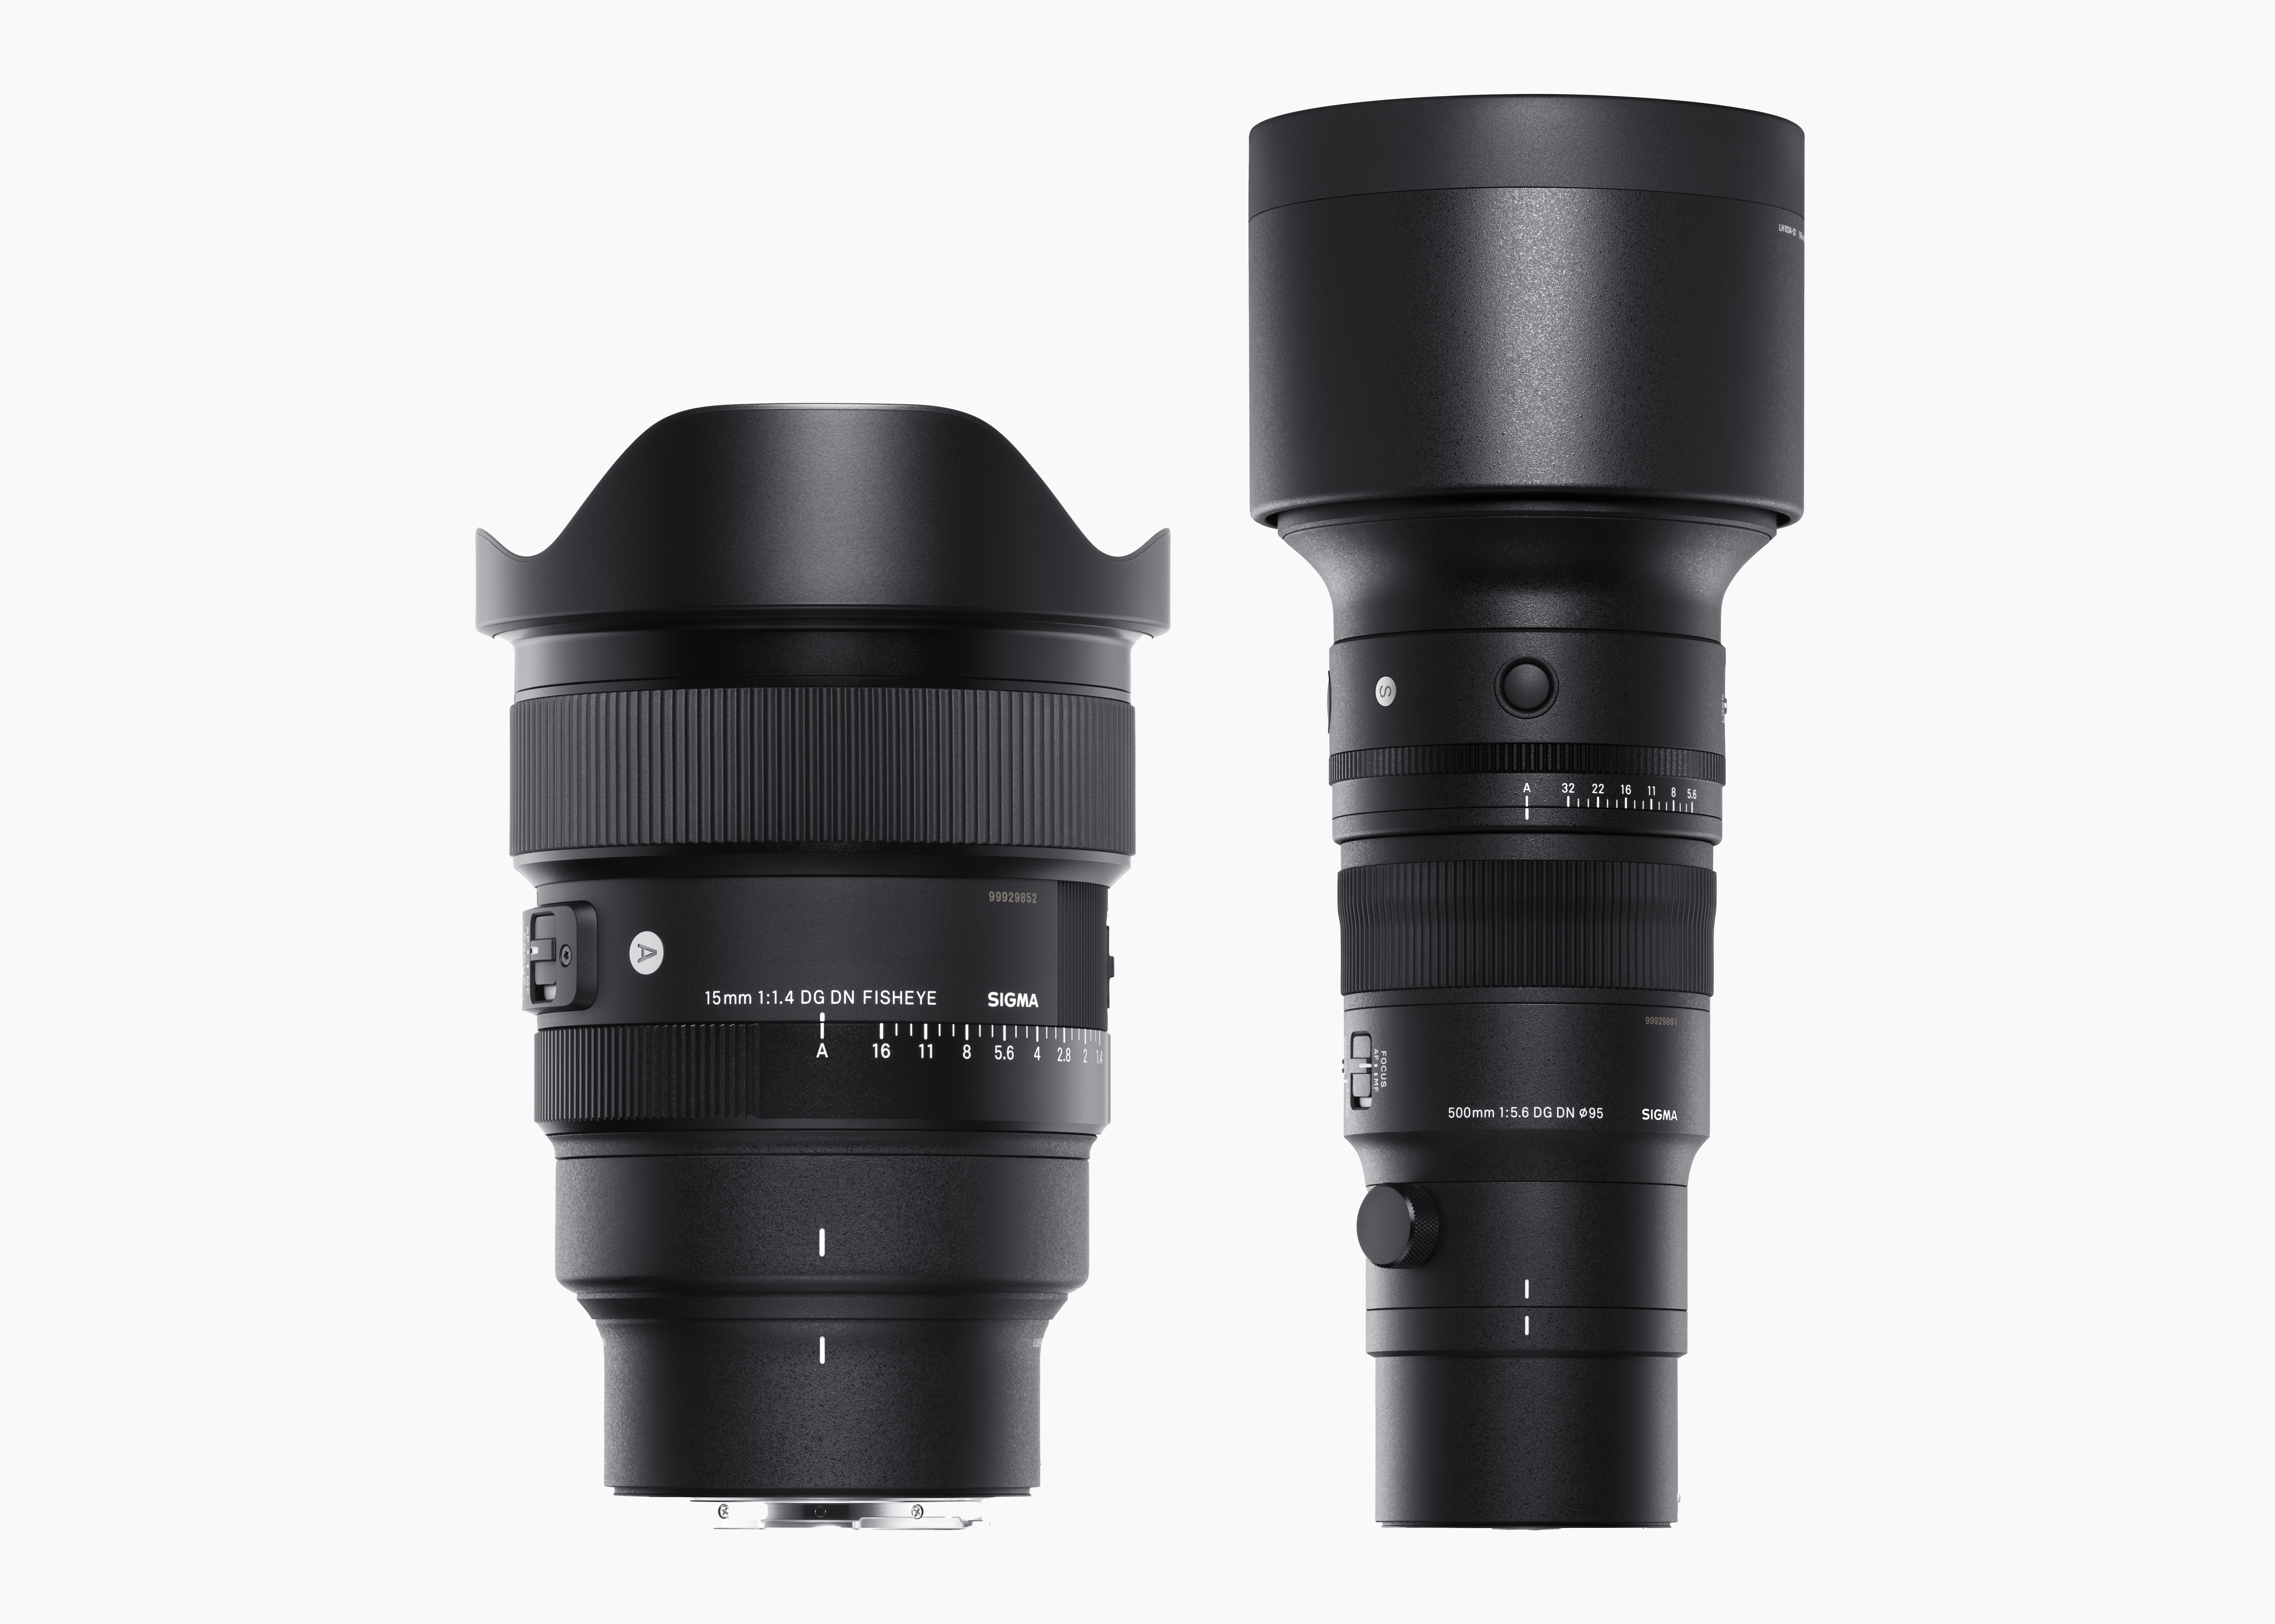 NEW SIGMA 15mm F1.4 DG DN and SIGMA 500mm F5.6 8